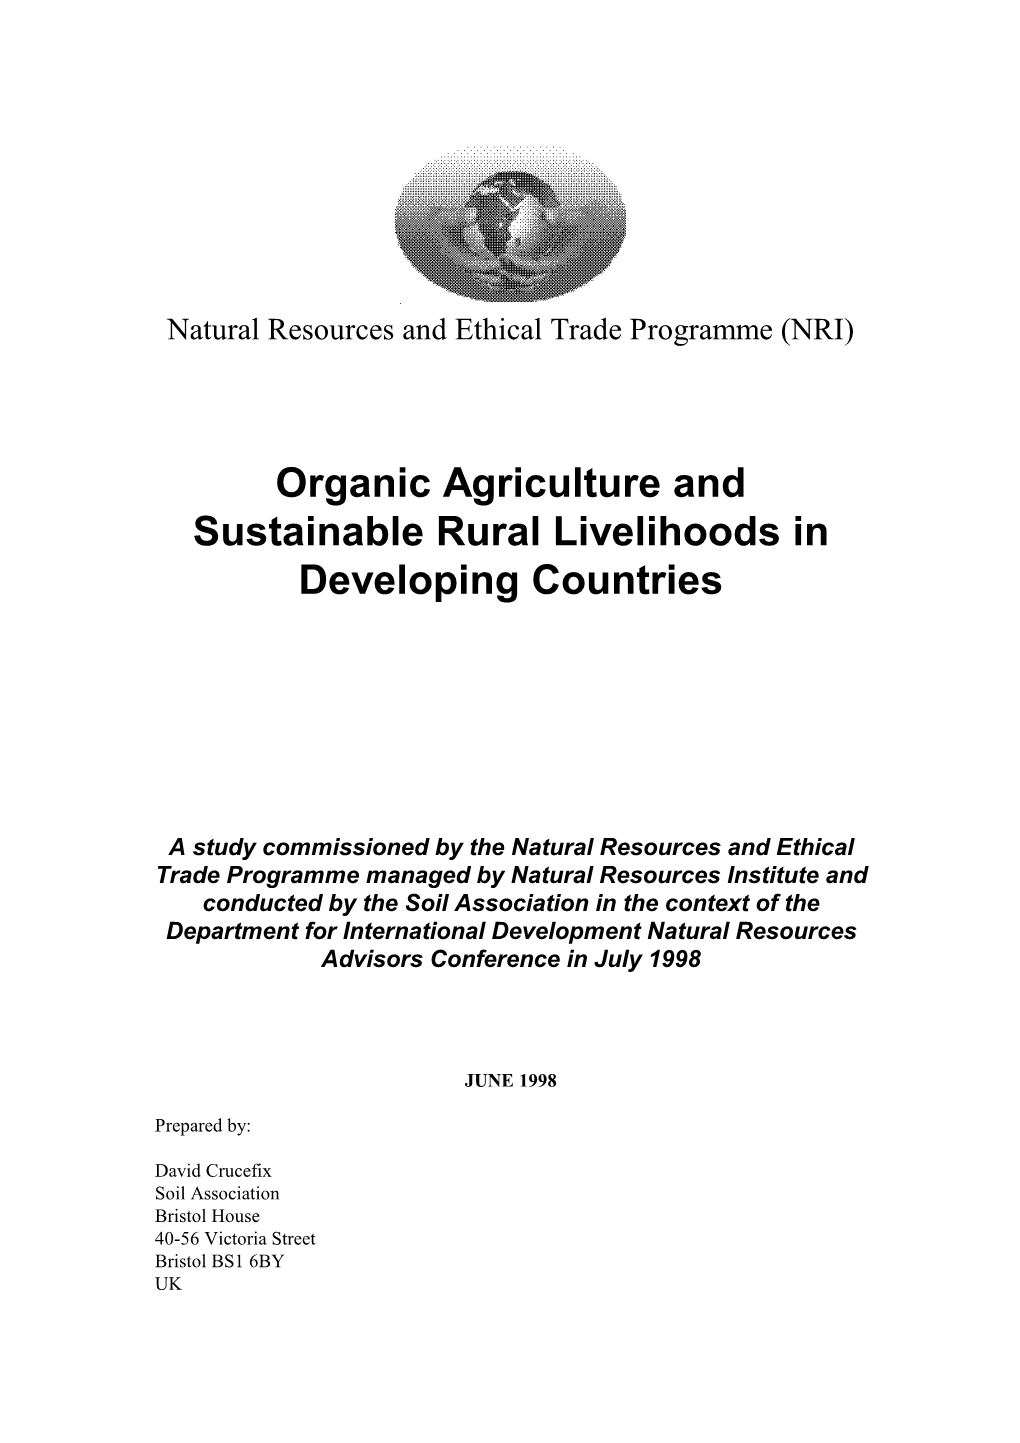 Organic Agriculture and Sustainable Rural Livelihoods in Developing Countries